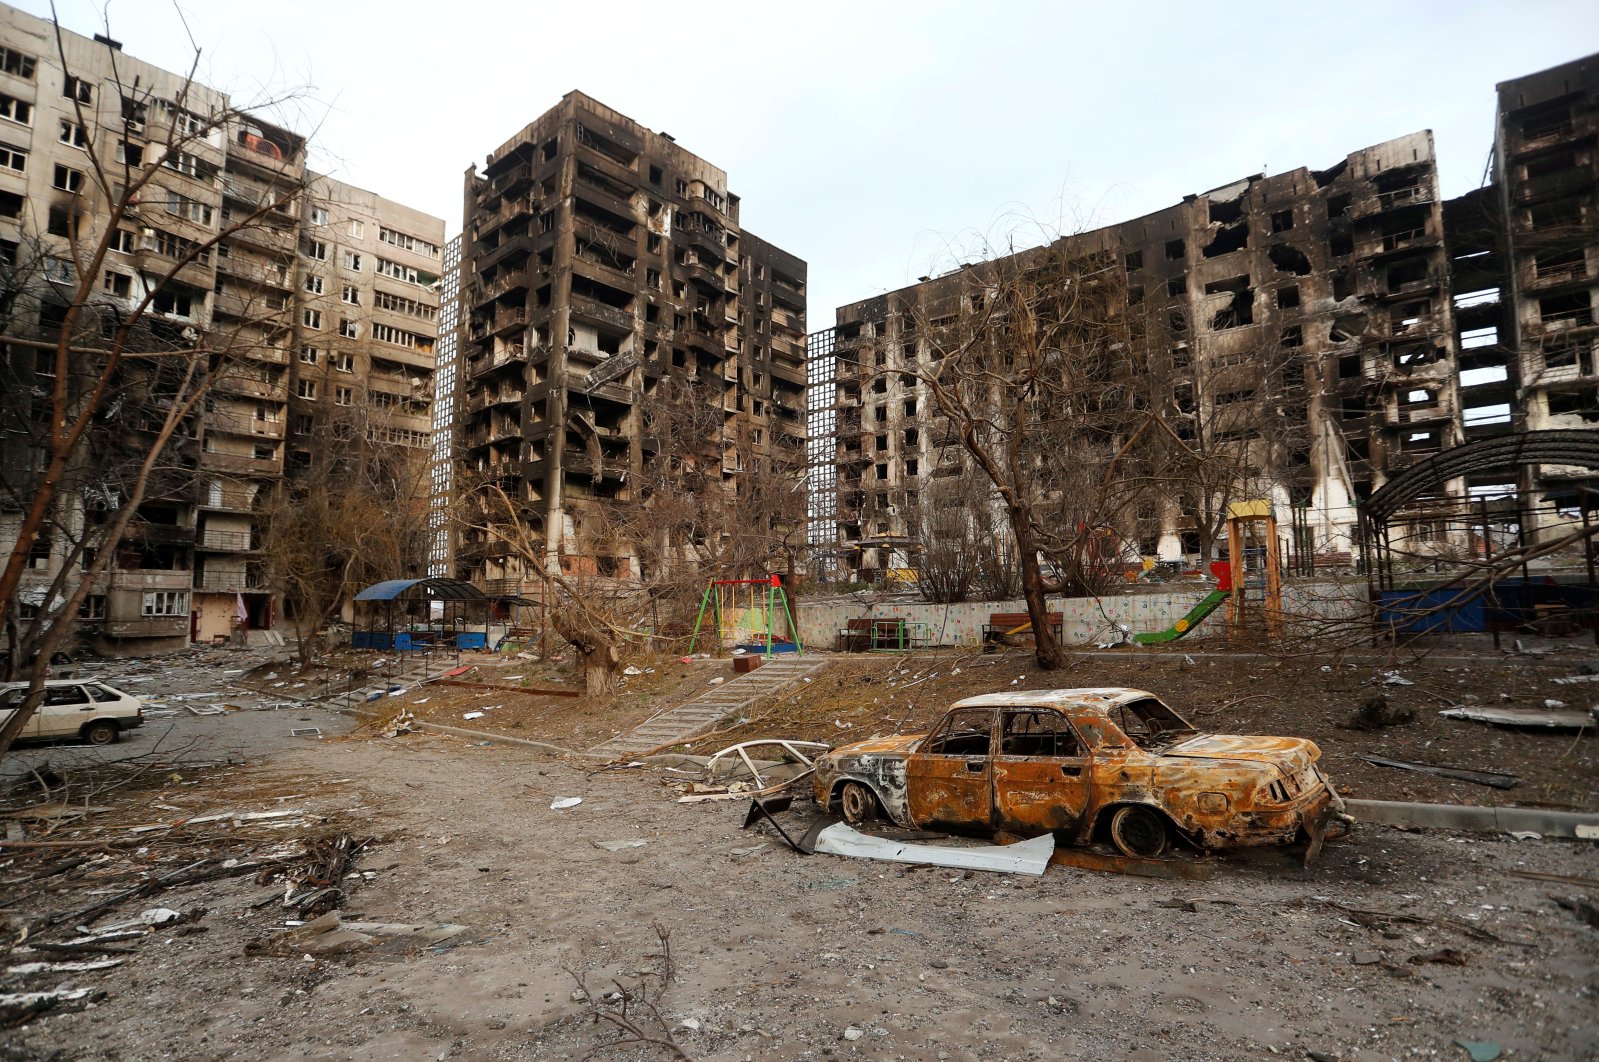 A view shows apartment buildings destroyed during the Ukraine-Russia conflict in the besieged southern port city of Mariupol, Ukraine, March 30, 2022. (Reuters Photo)